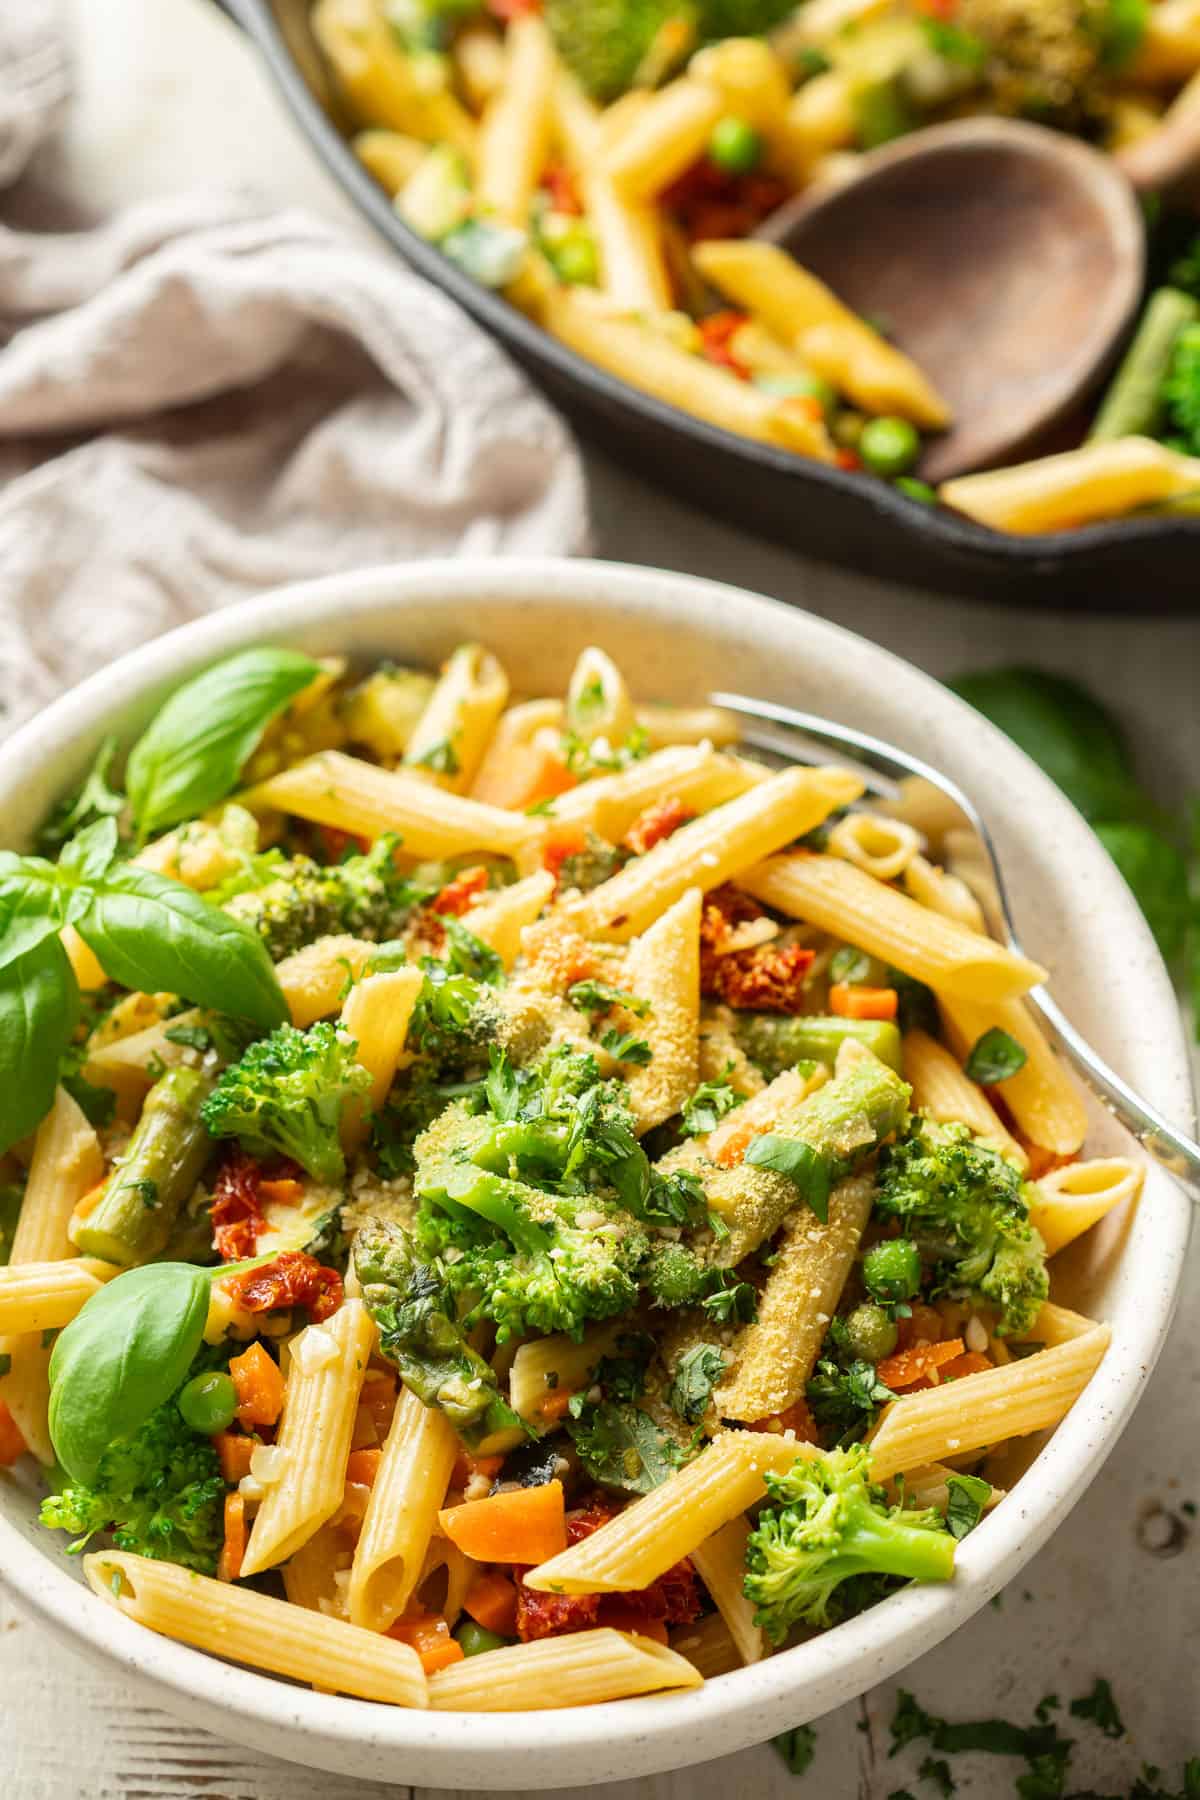 Bowl of Vegan Pasta Primavera with skillet and wooden spoon in the background.